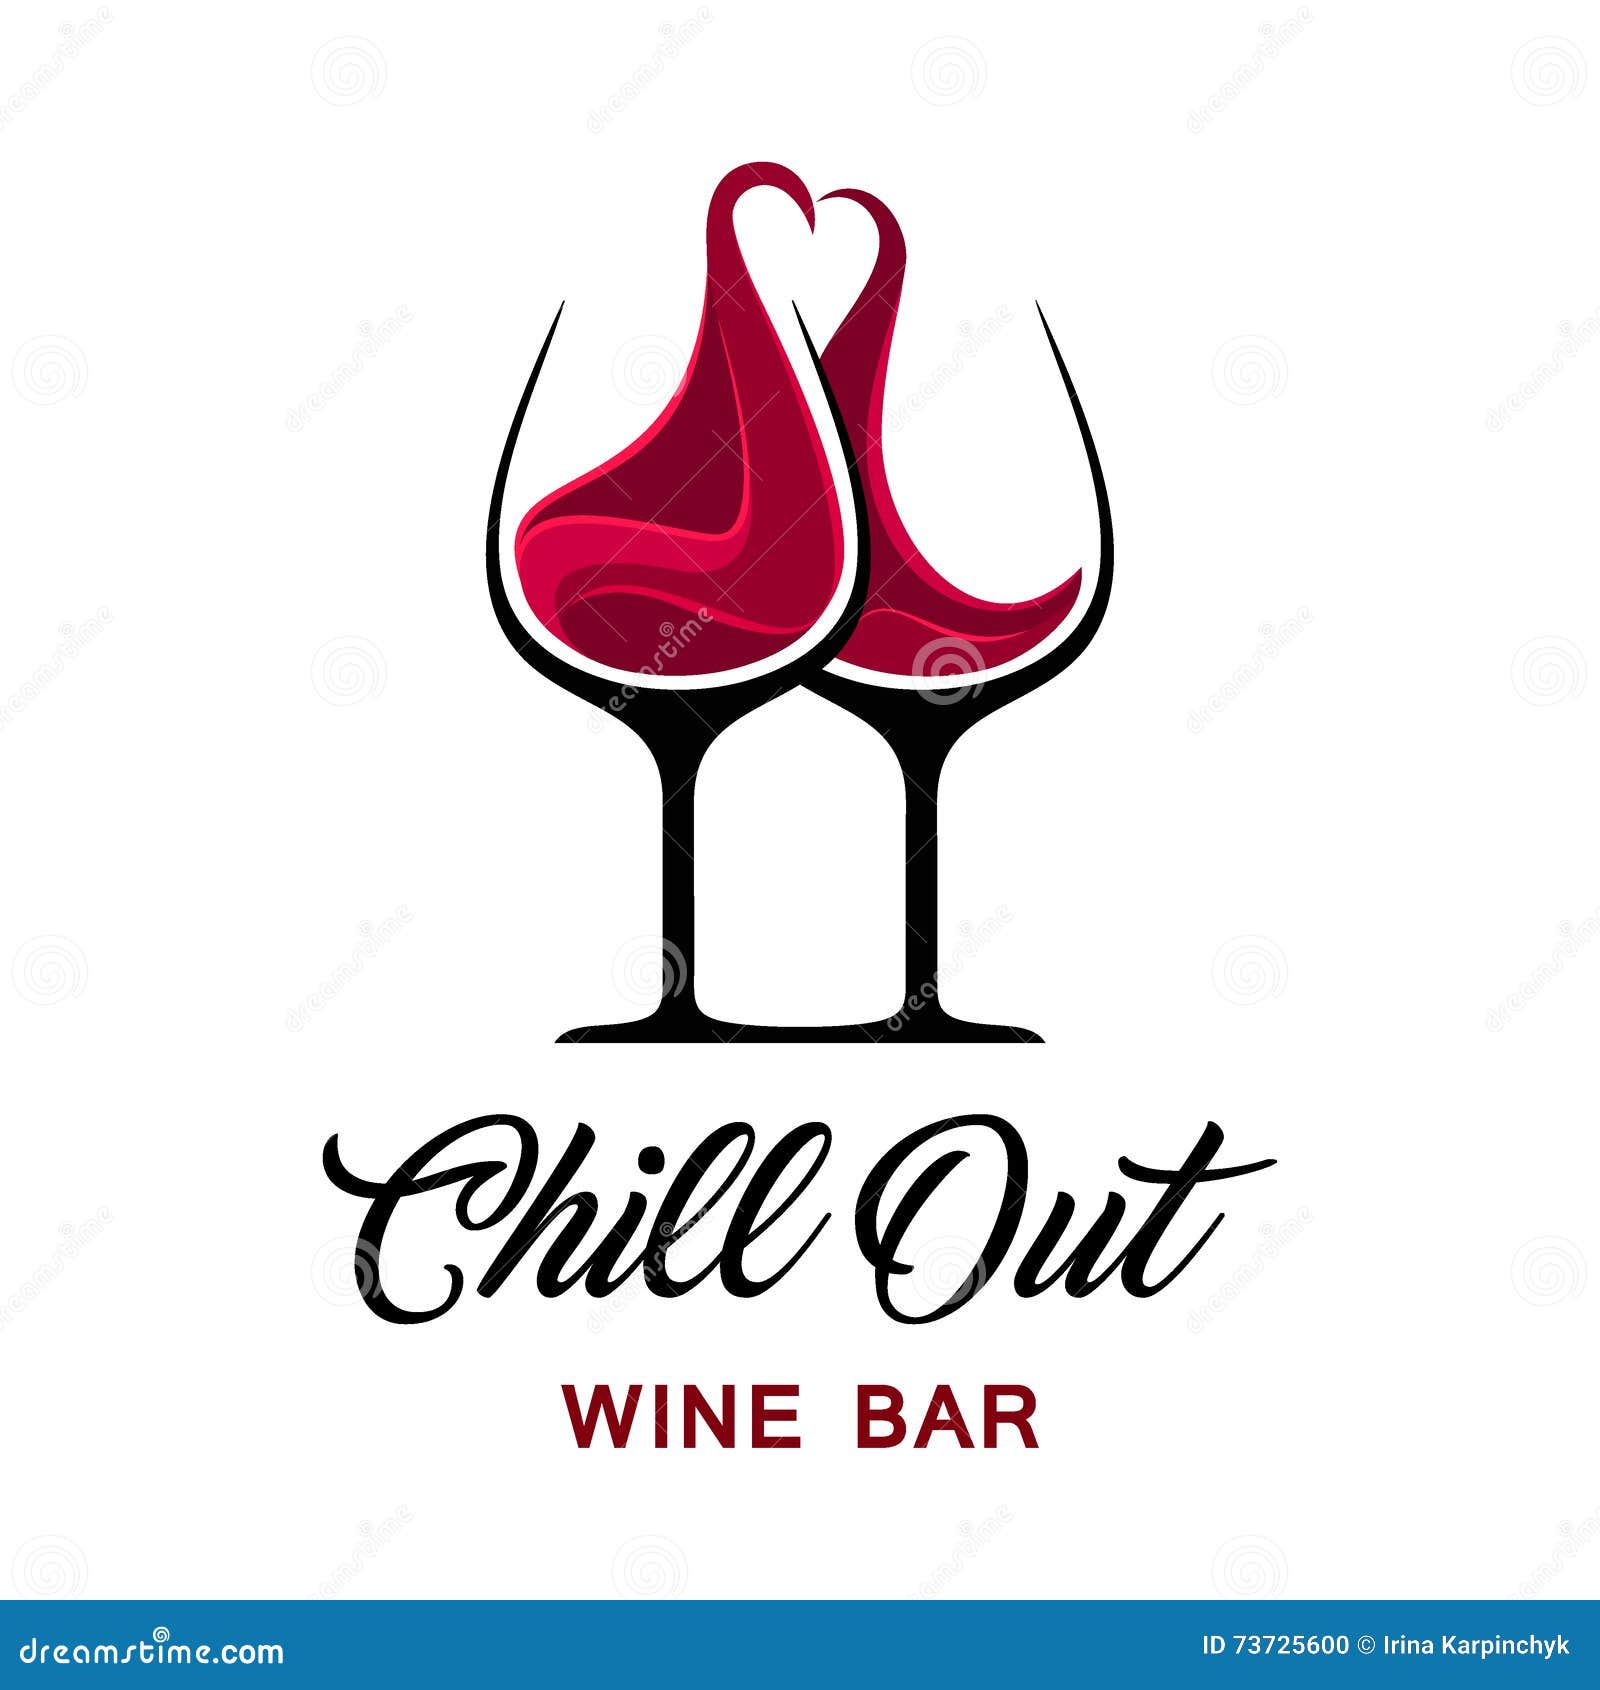 Chill Out Wine Bar Logo Template. Stock Vector - Illustration of menu,  luxury: 73725600